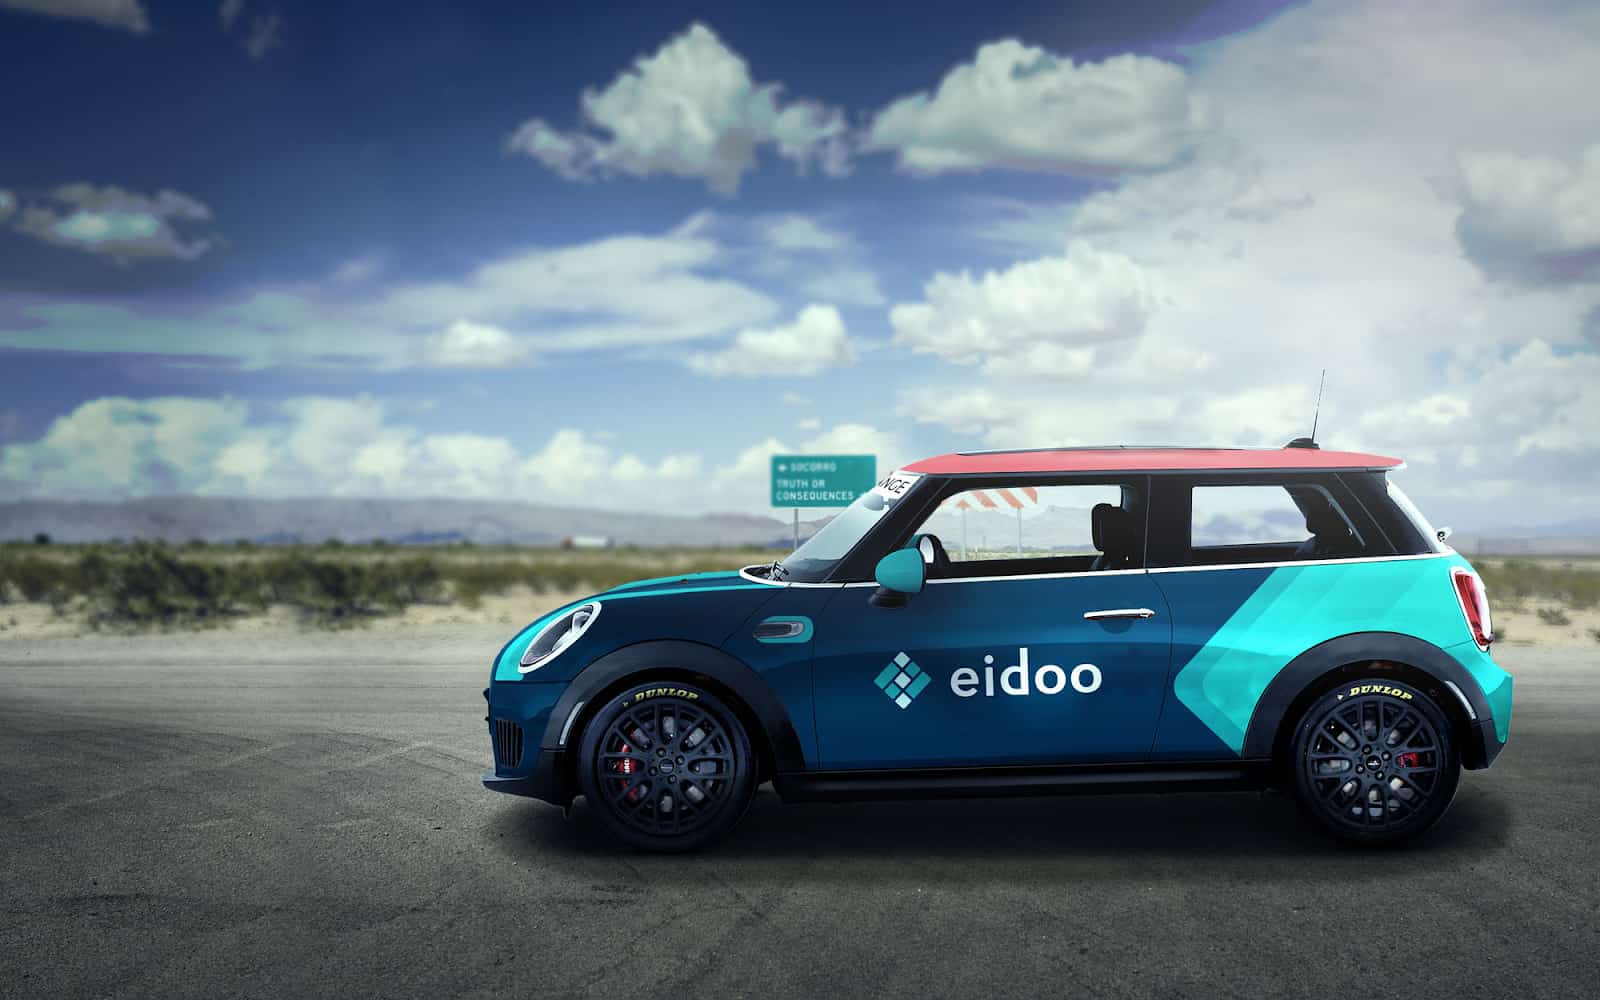 The Eidoo sponsored car pictured above might be Mini but it’s sure to catch attention on the track.